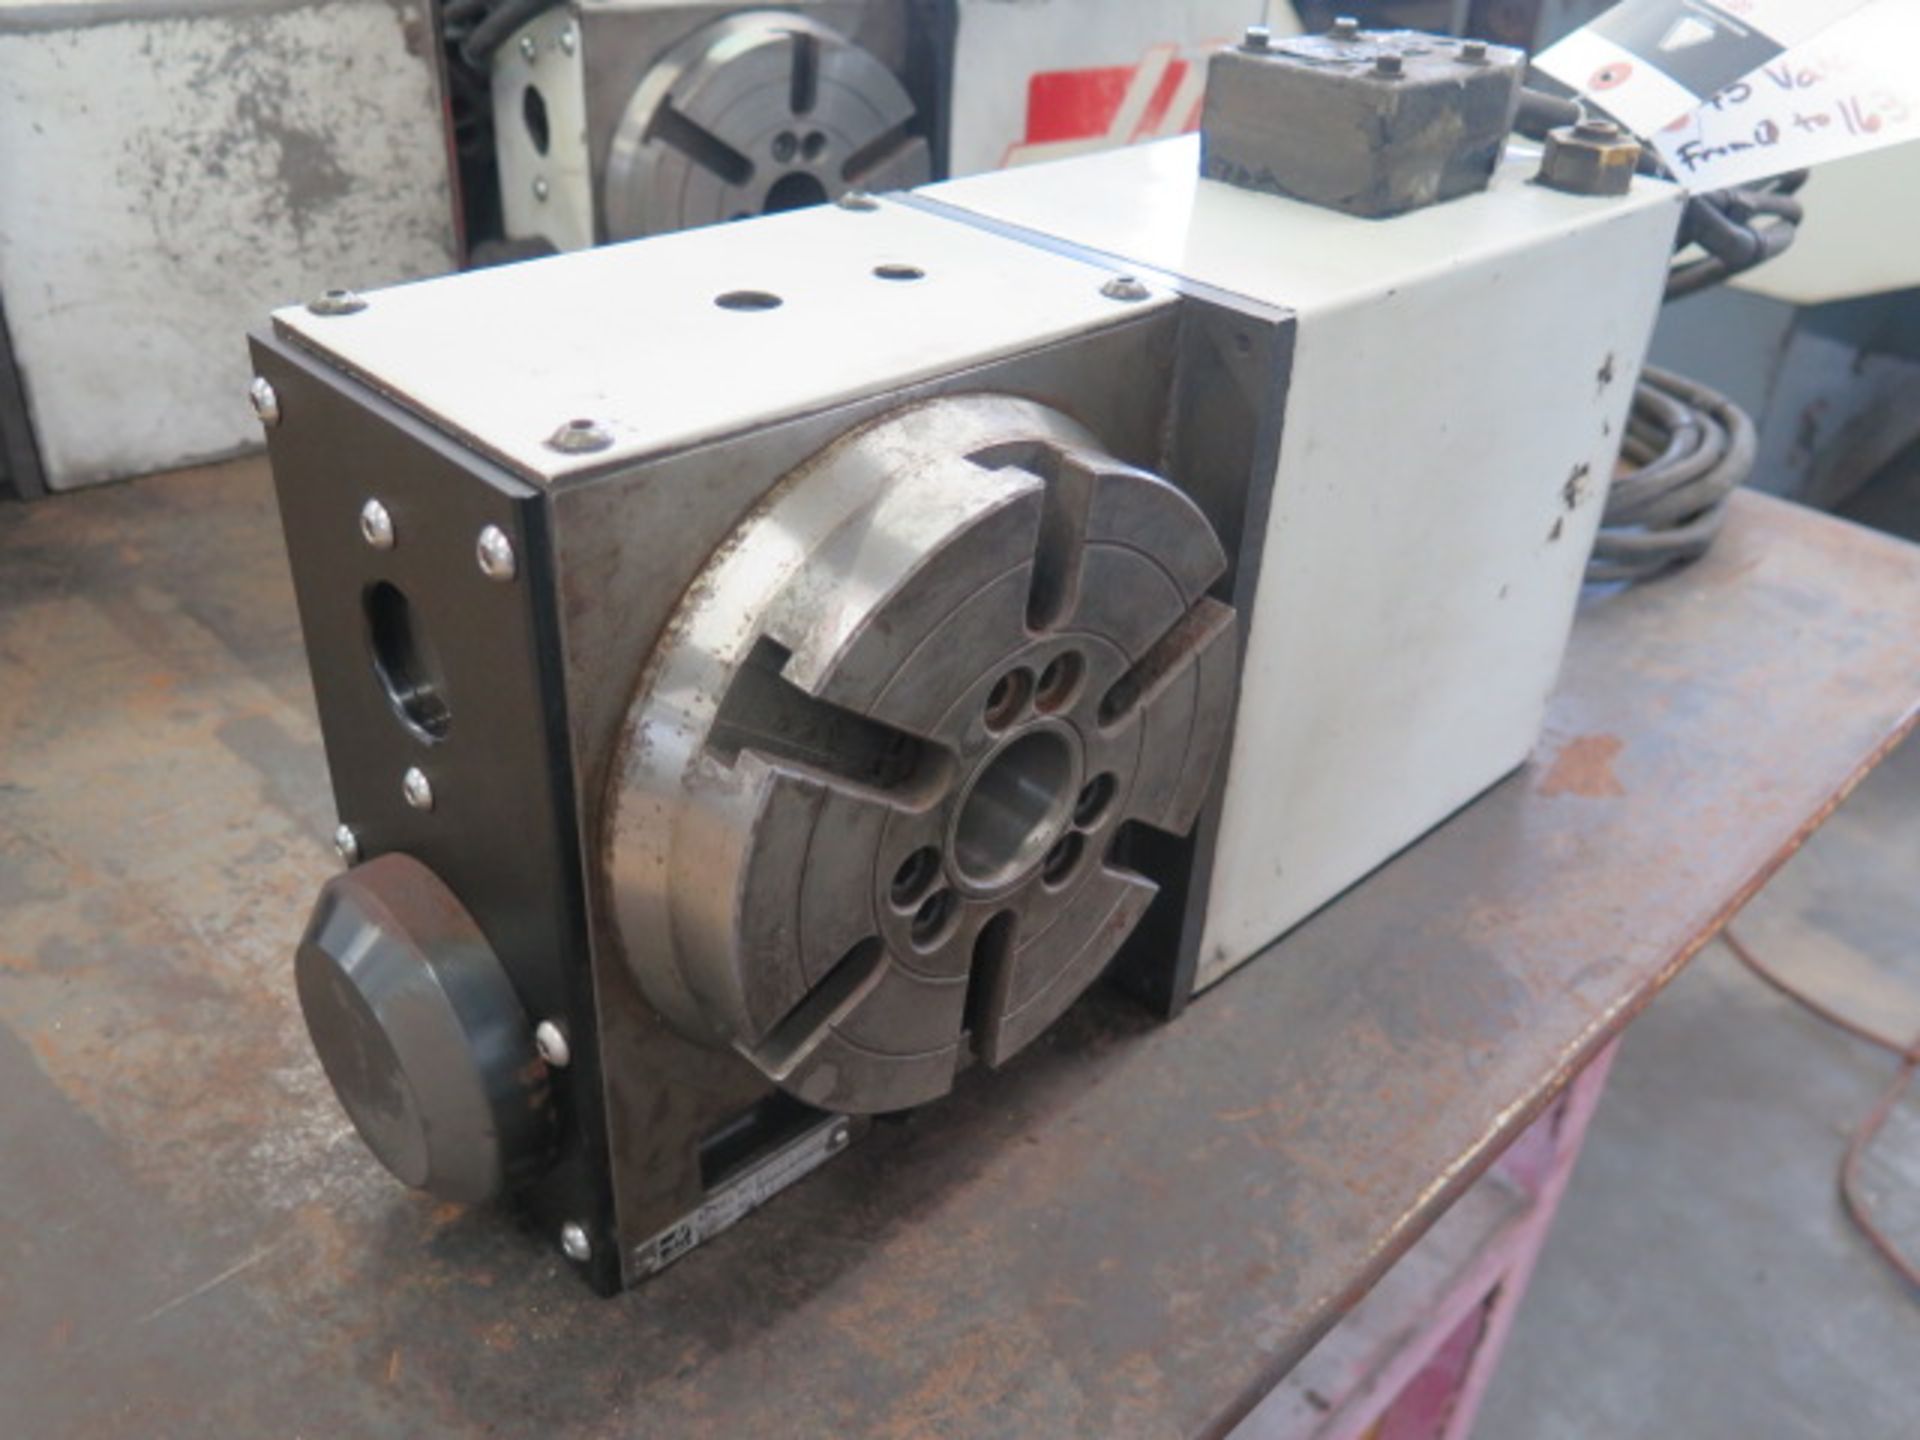 Haas HRT160H 6” 4th Axis Rotary Indexer s/n 163567 (Change Parameter #45 VALUE from “0” to “16384”) - Image 2 of 9